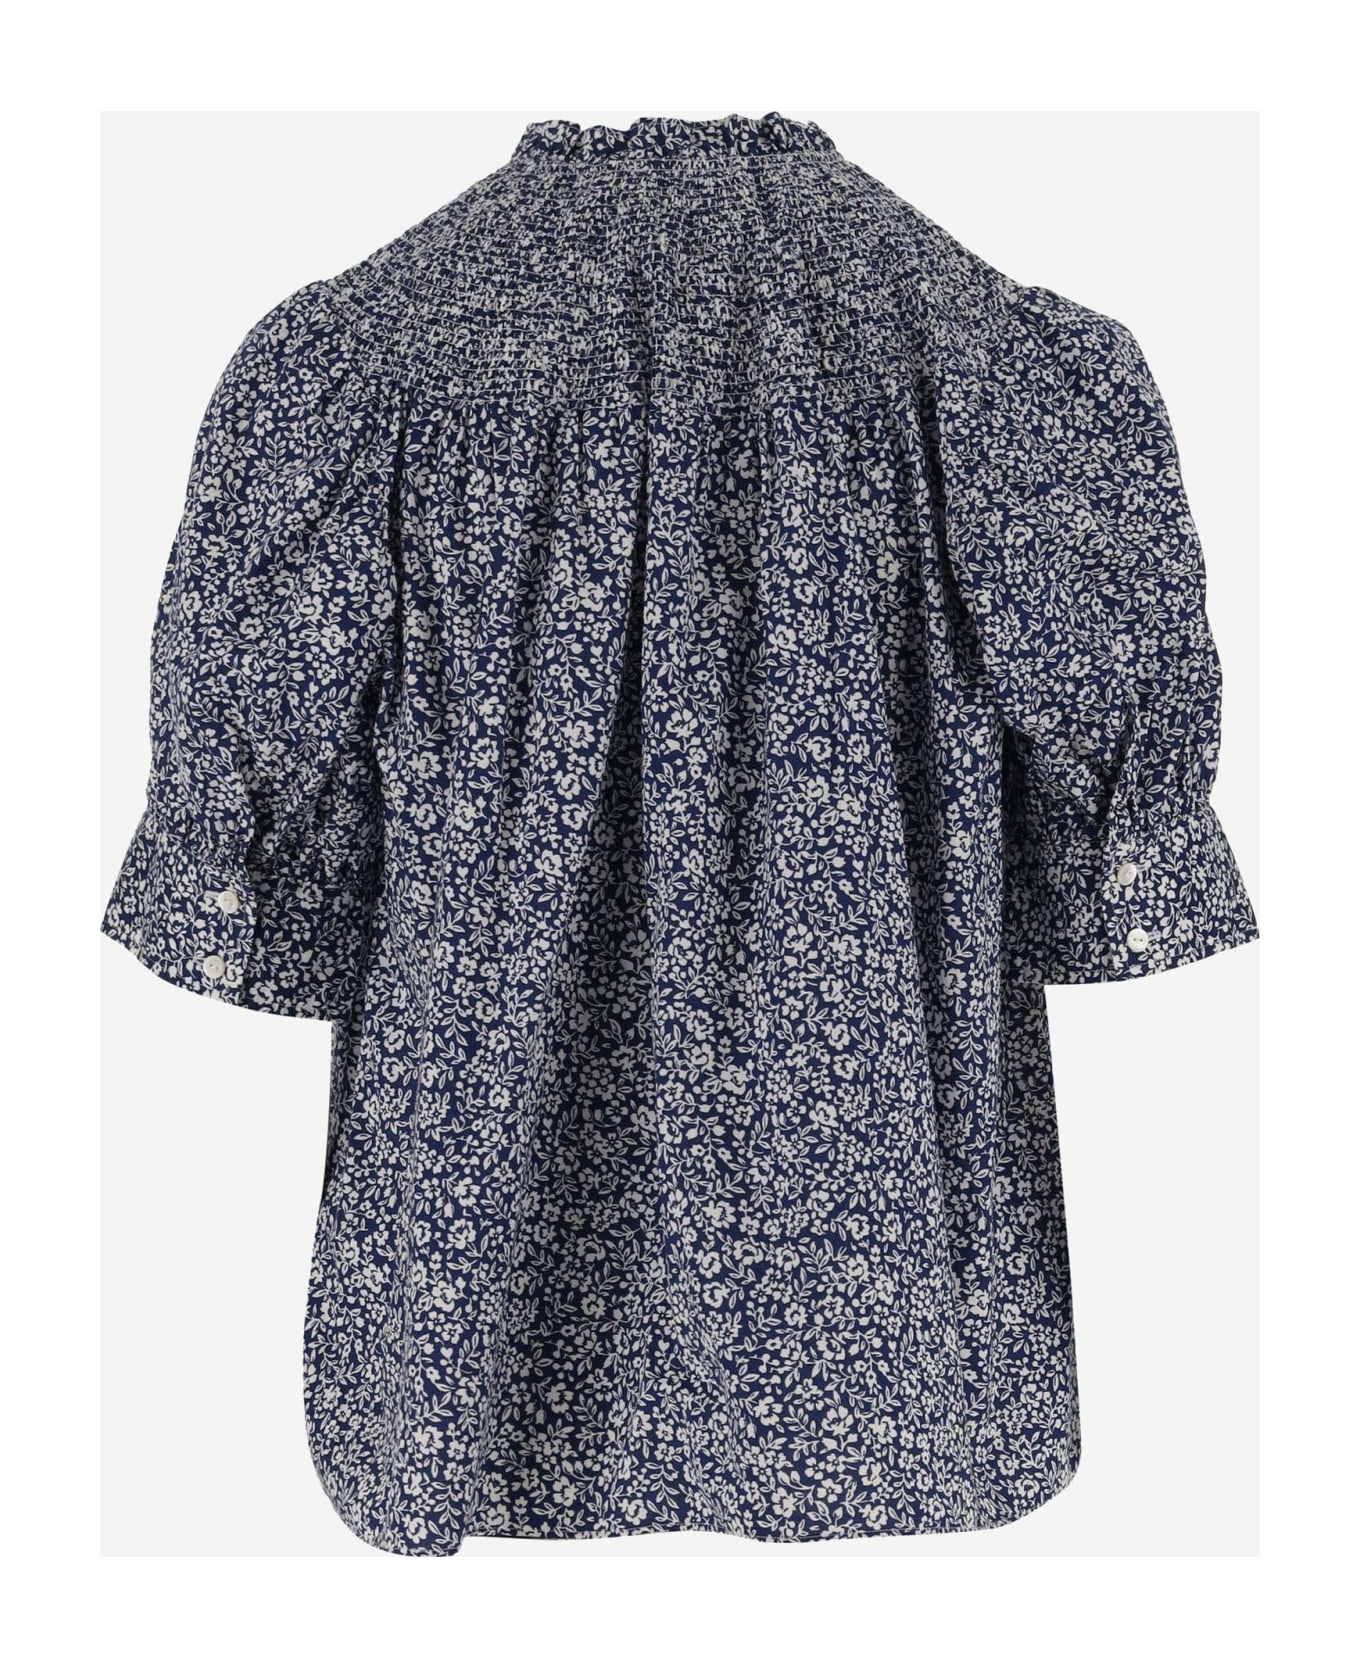 Polo Ralph Lauren Cotton Shirt With Floral Pattern - Red ブラウス